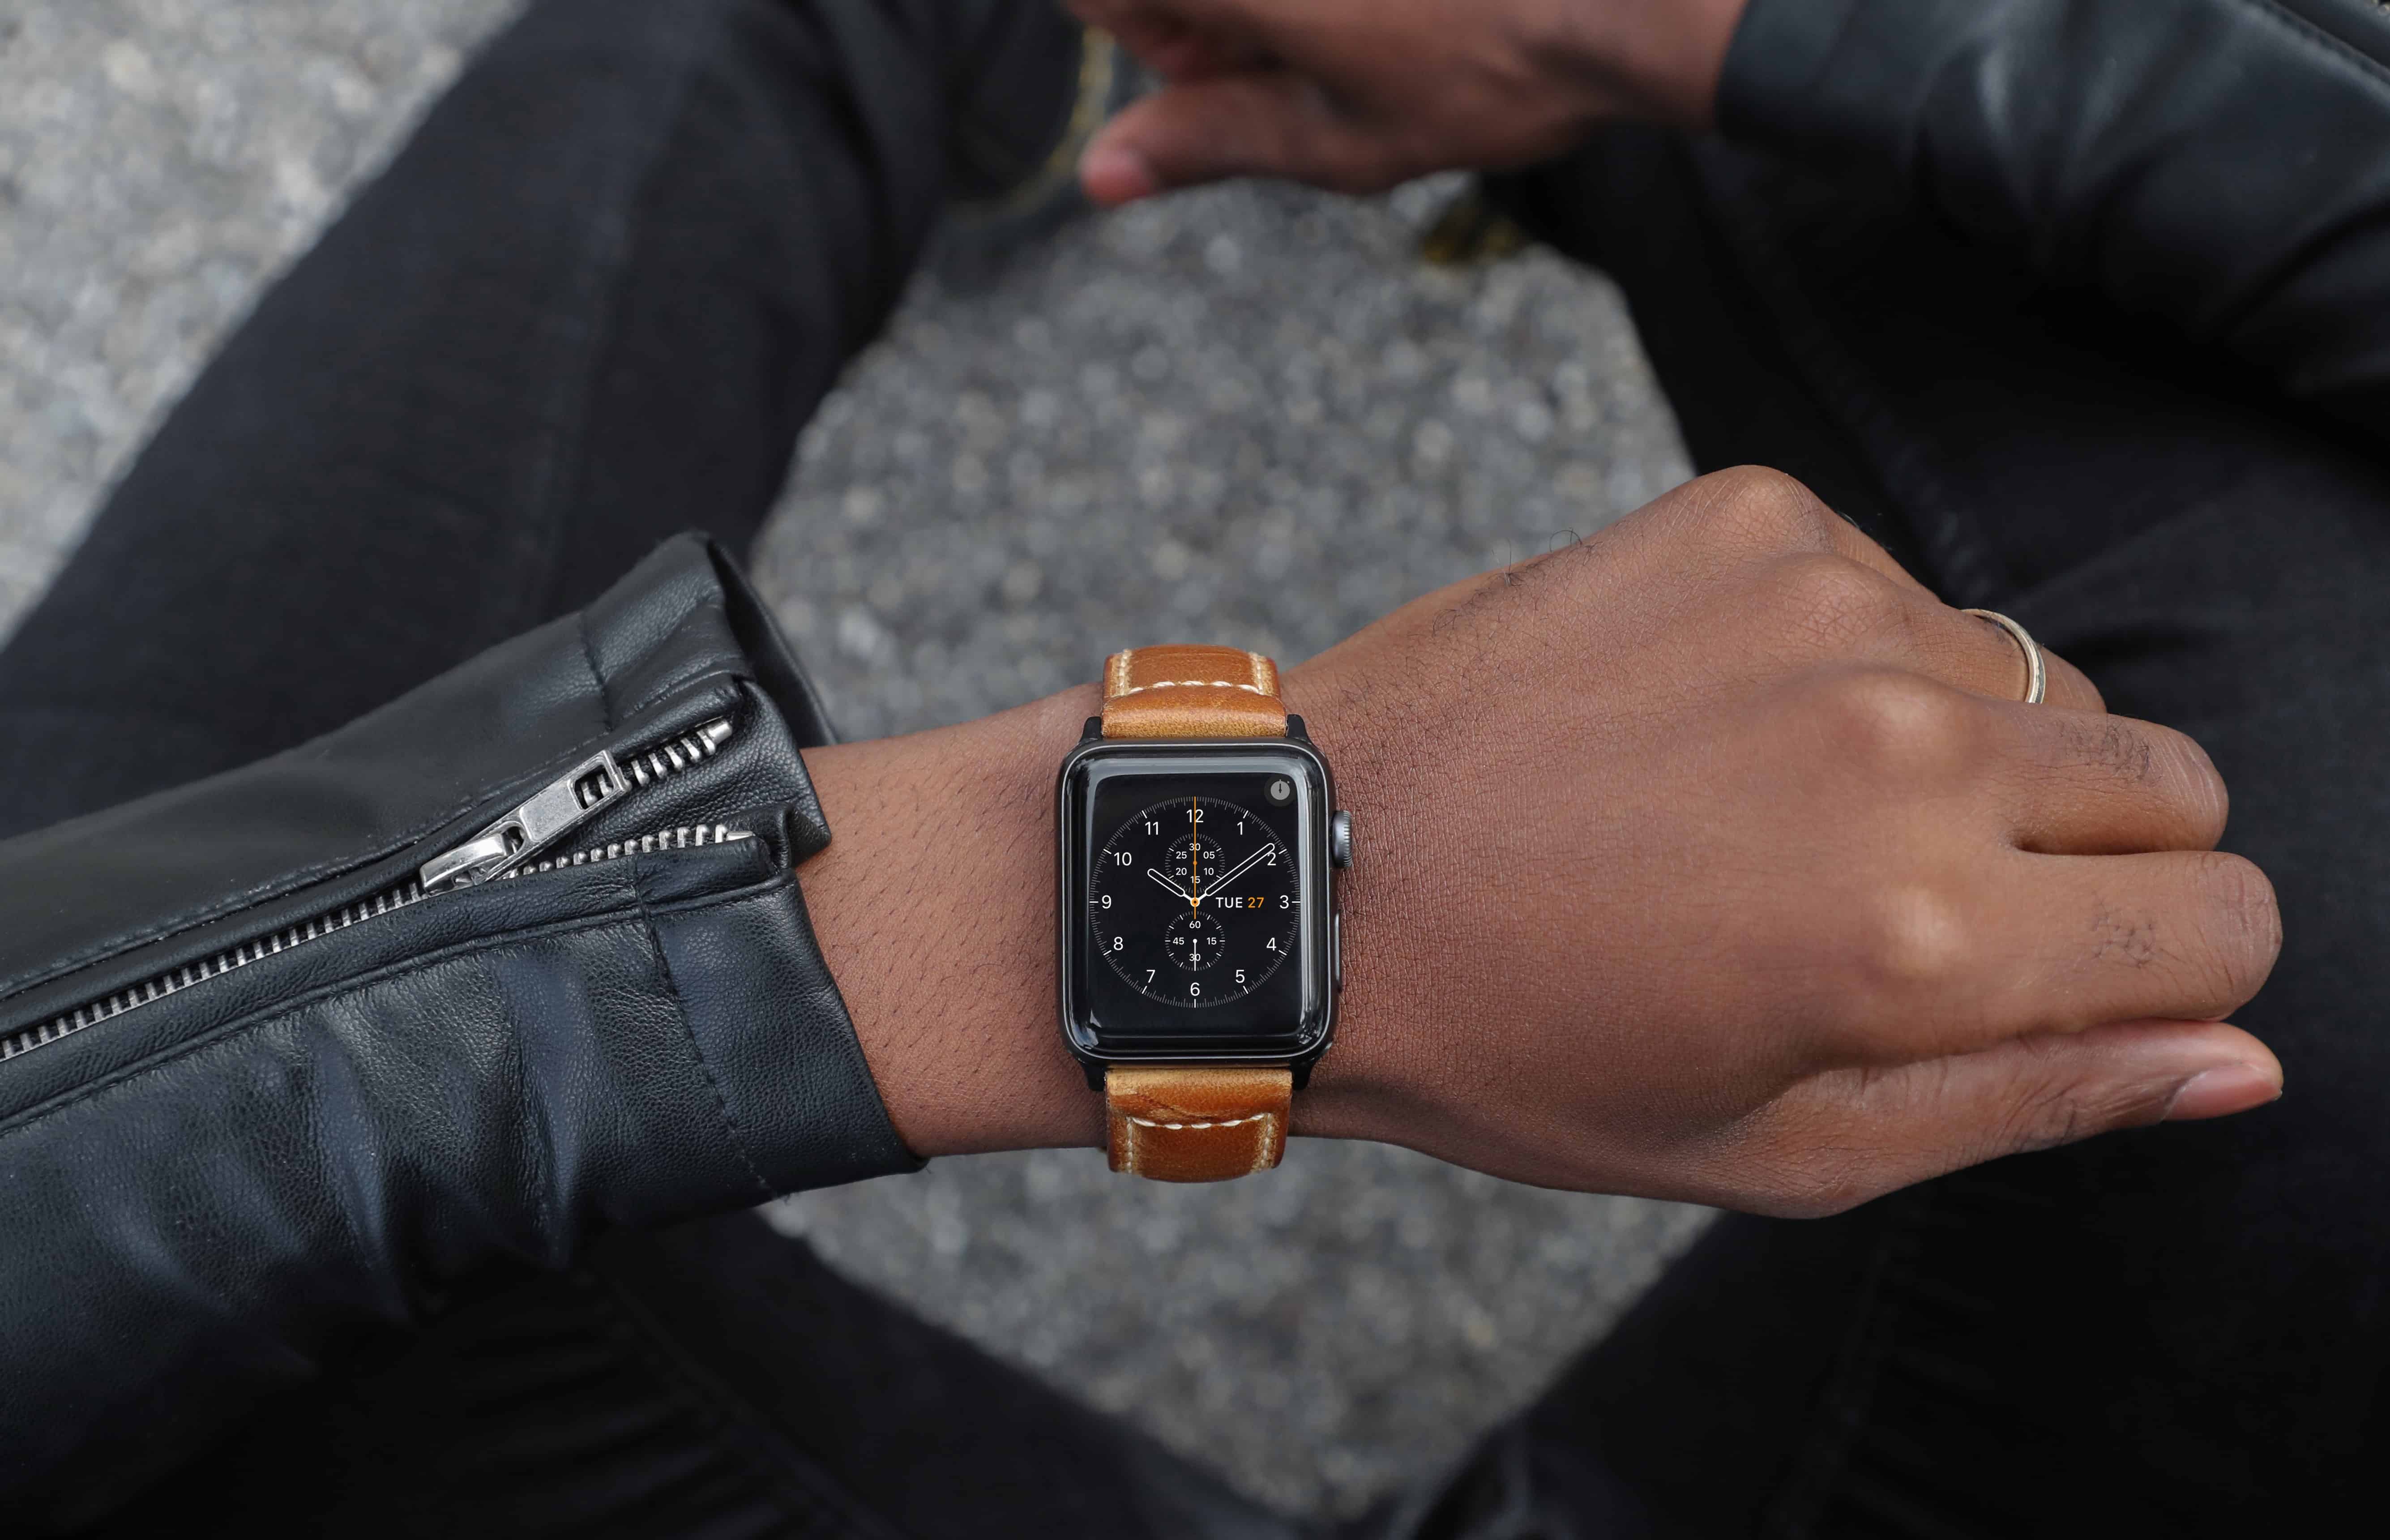 Apple Watch Series 4 deserves a serious leather strap